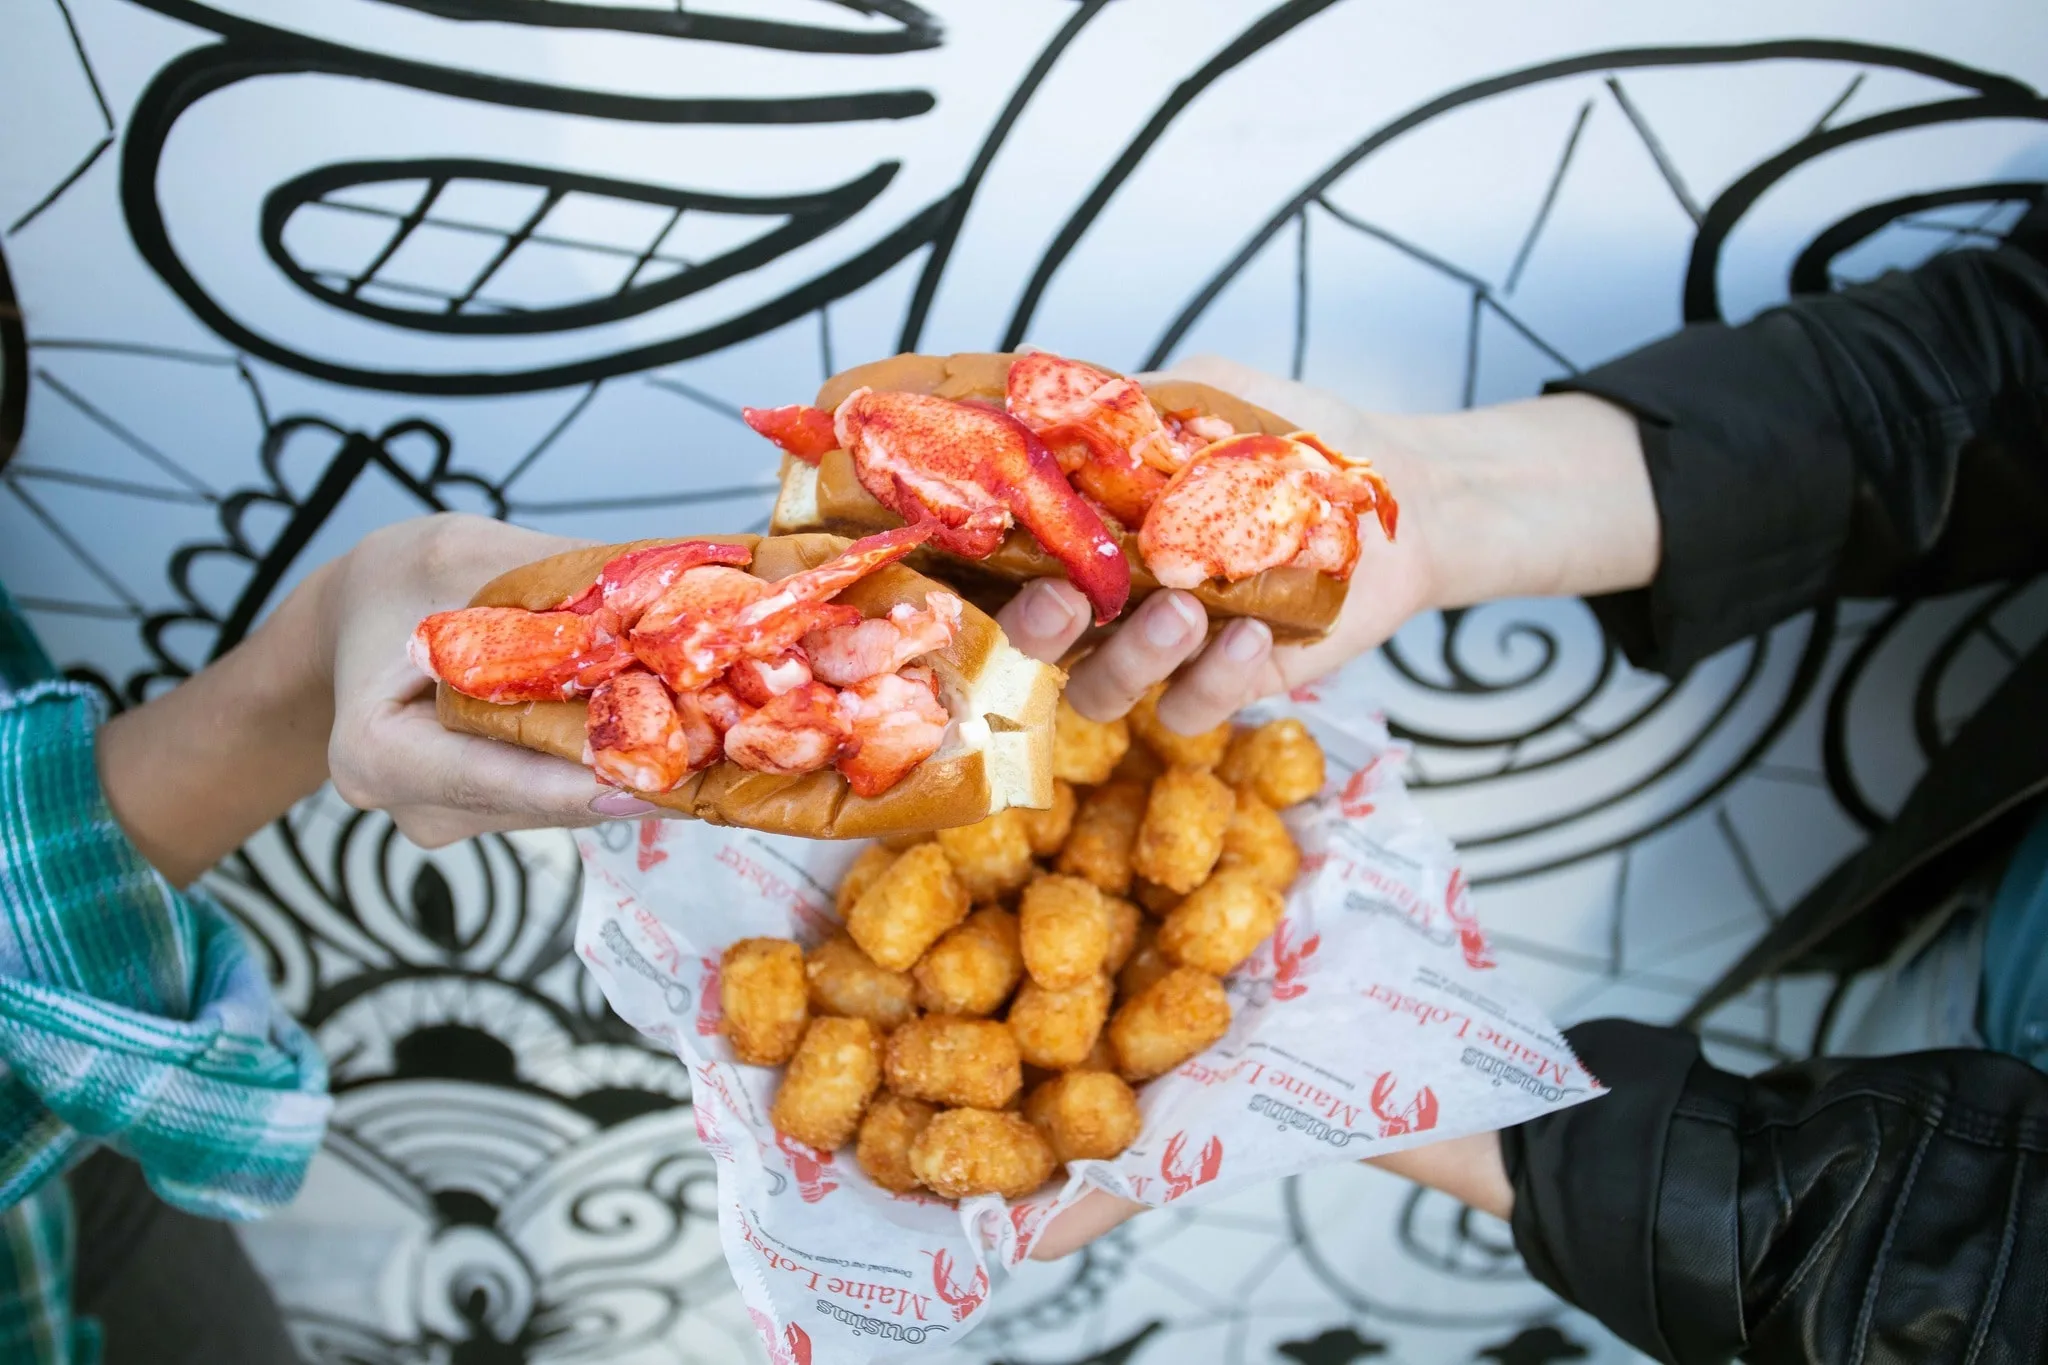 lobster rolls and tater tots at cousins maine lobster food truck in nashville